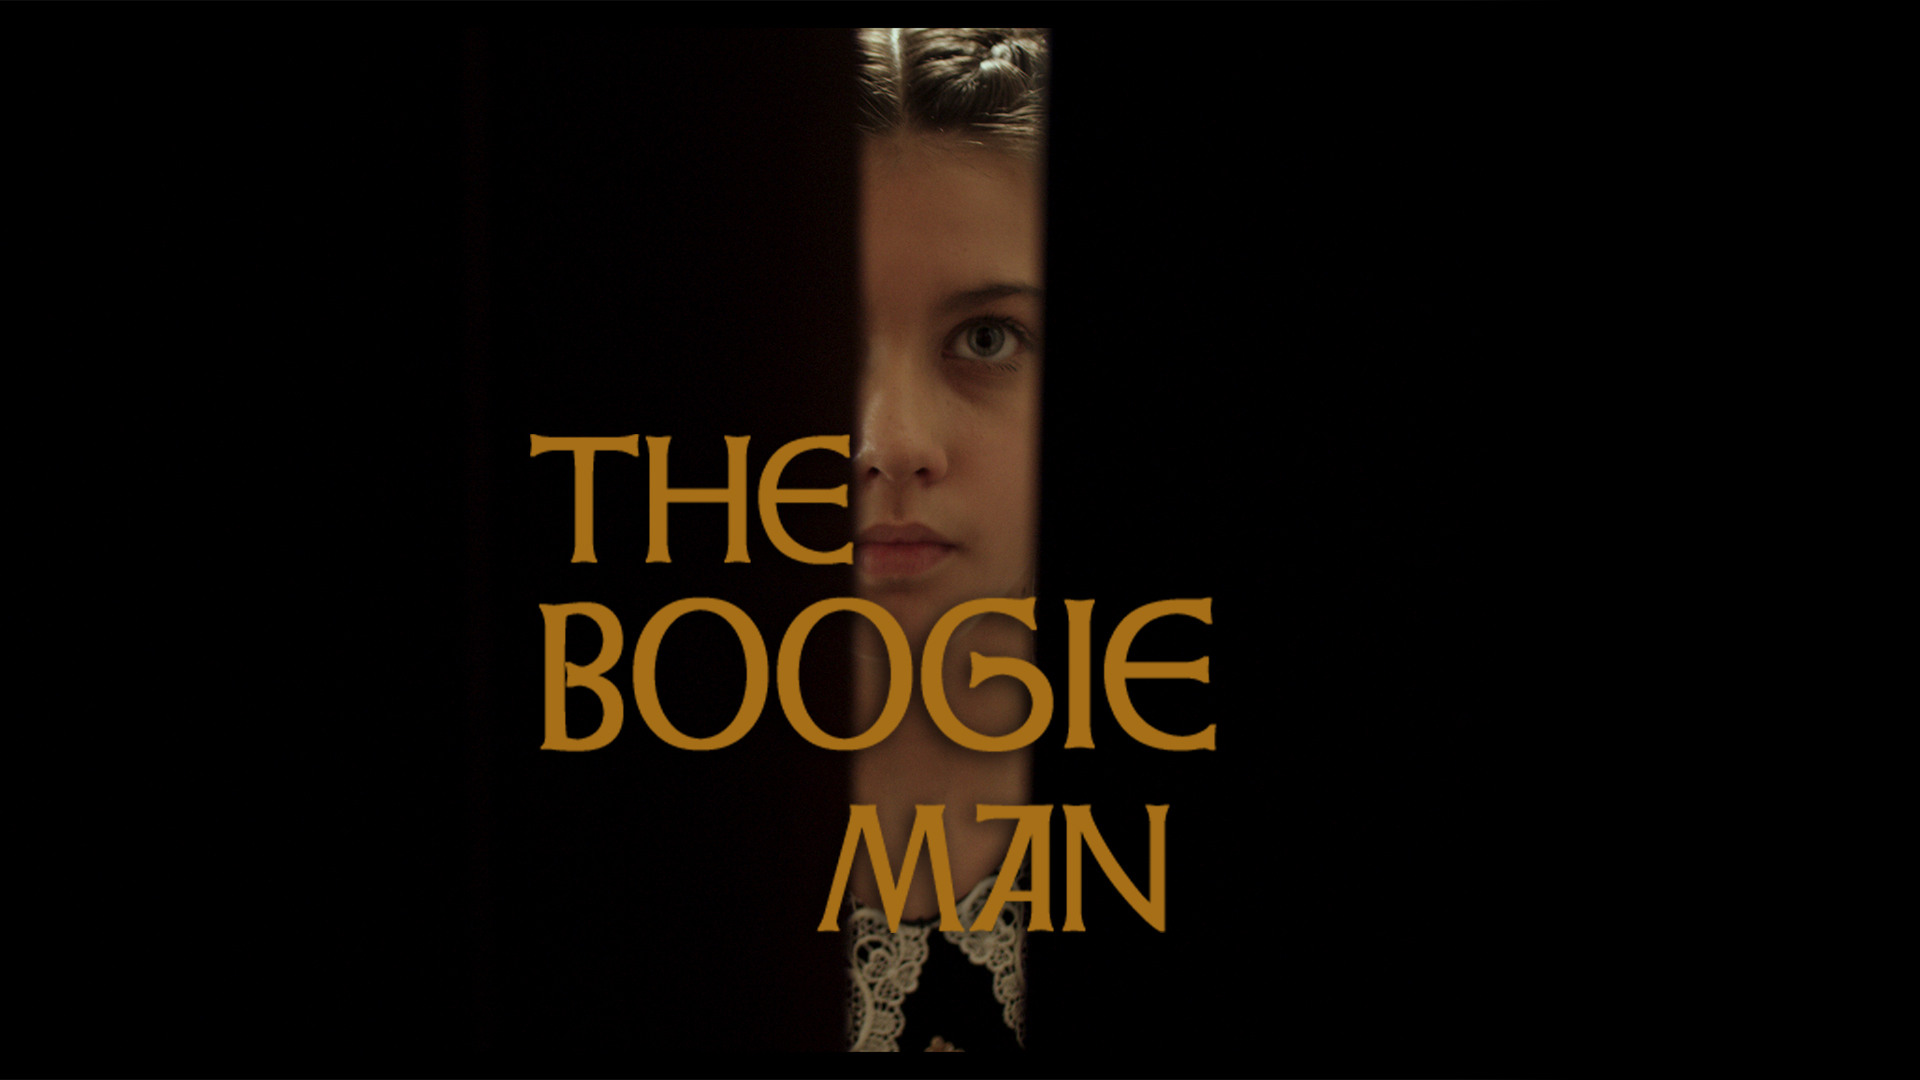 THE BOOGIE MAN